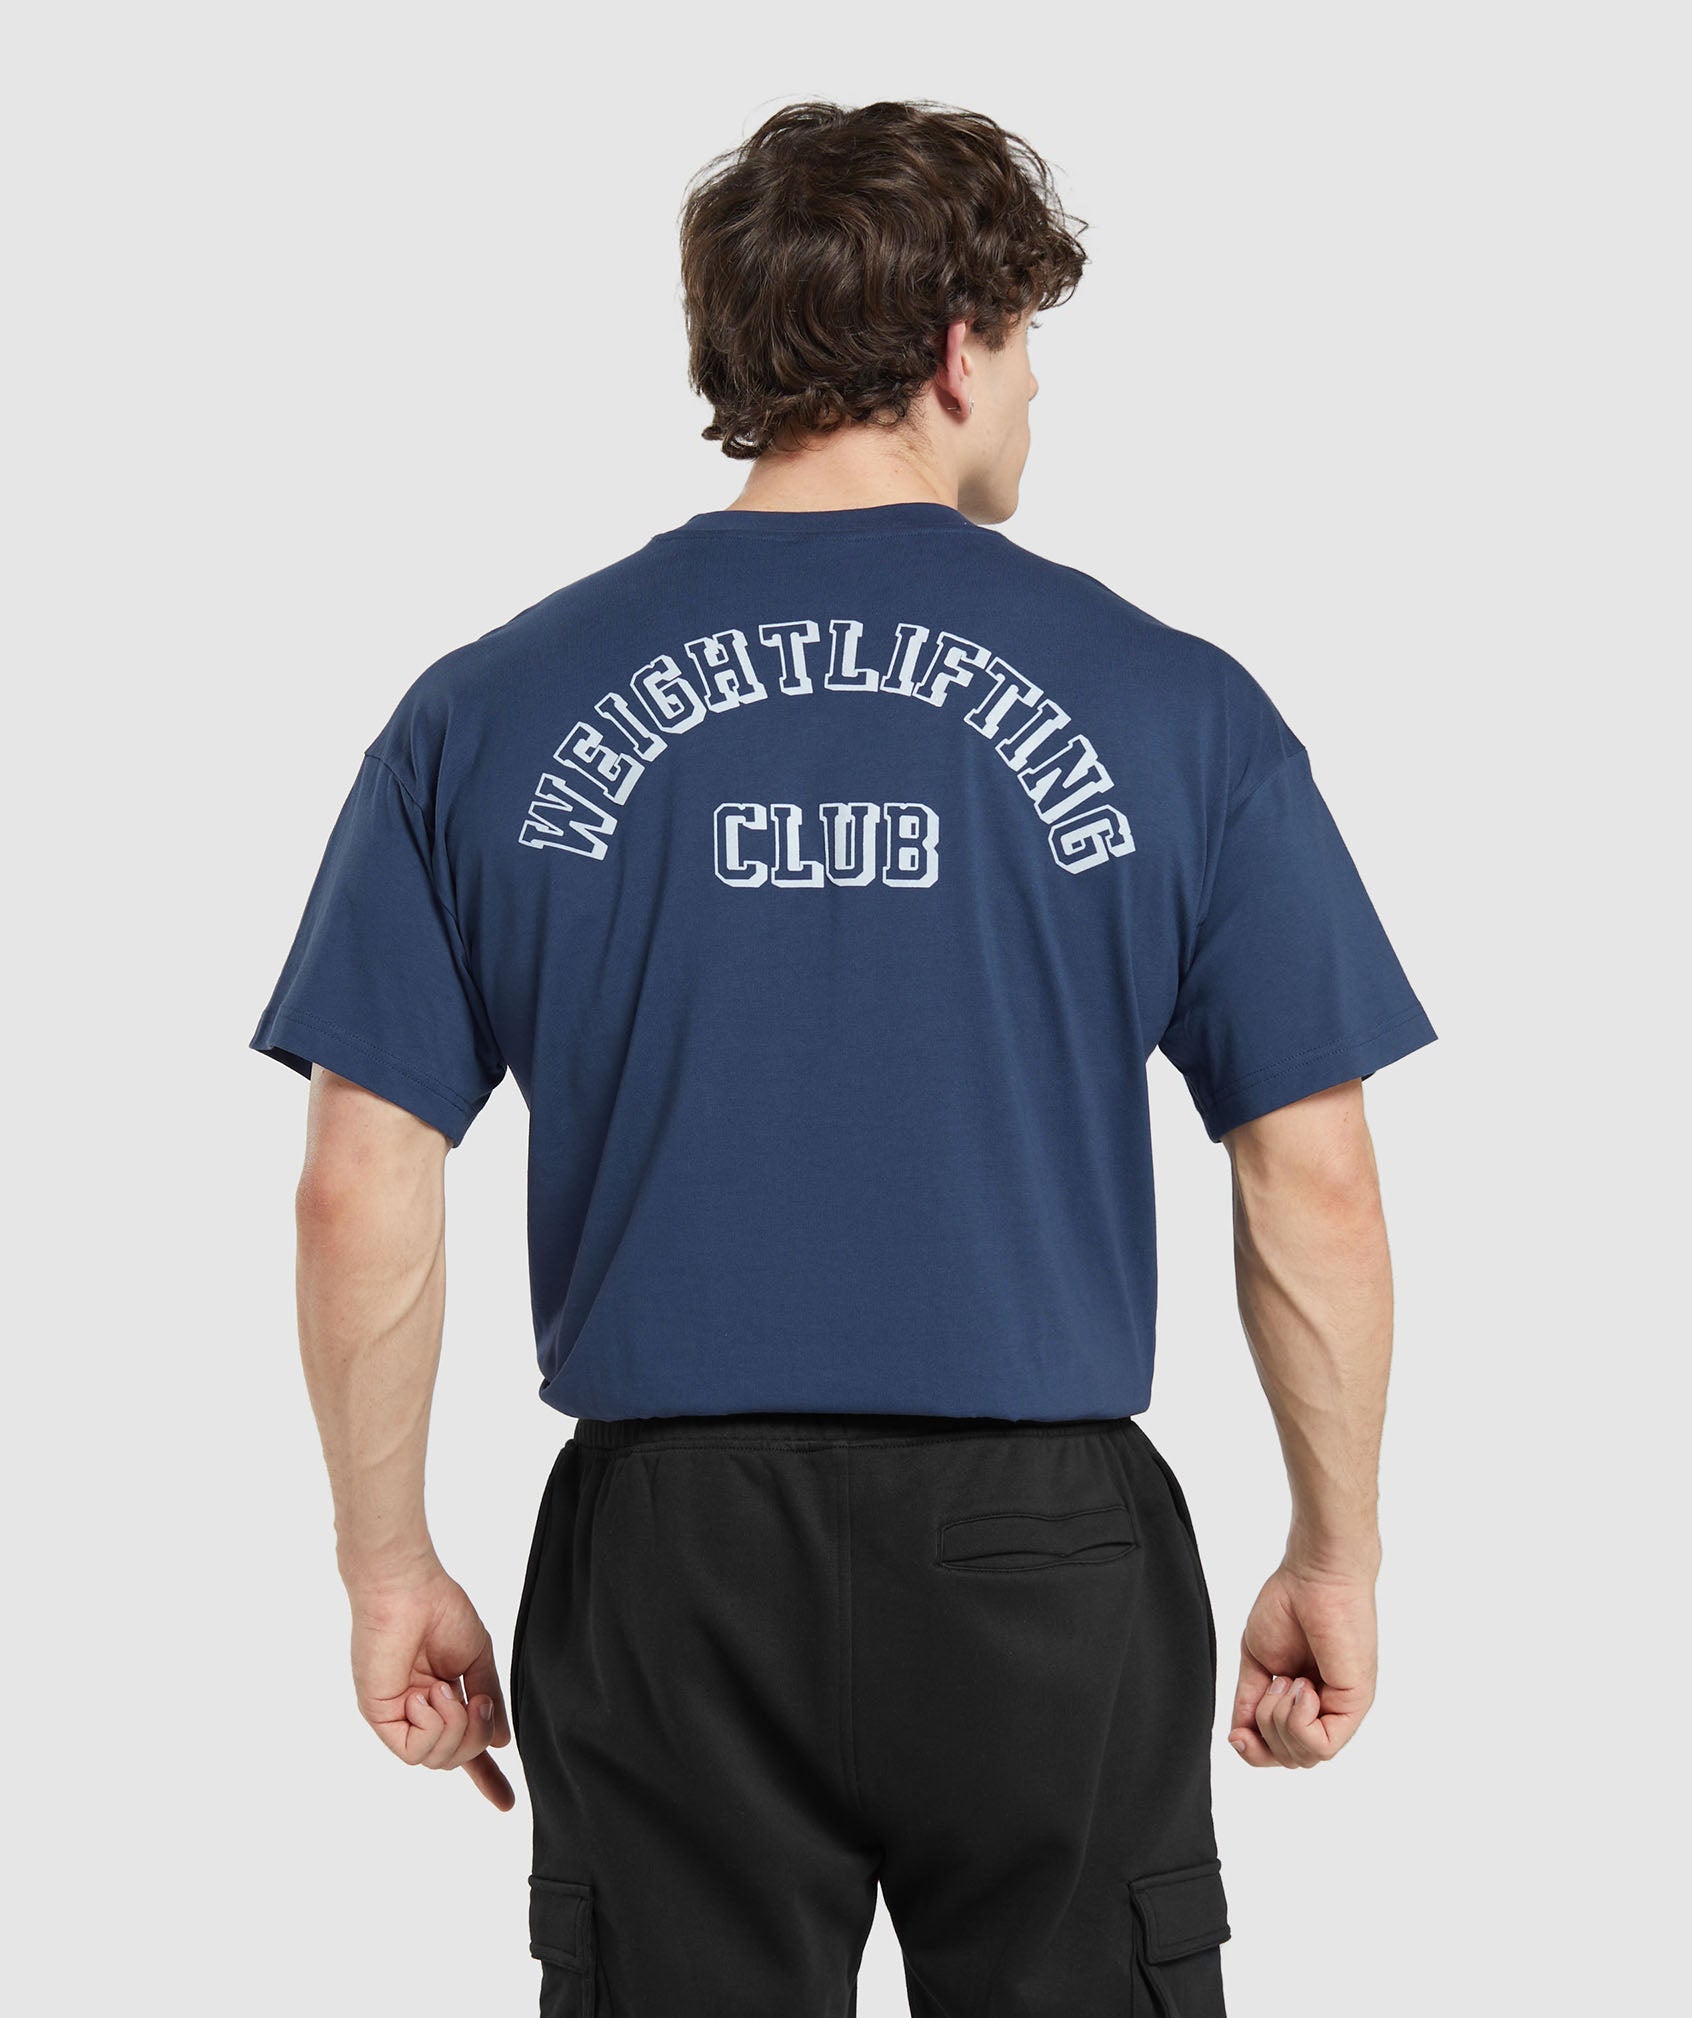 Weightlifting Club T-Shirt in Ash Blue - view 3